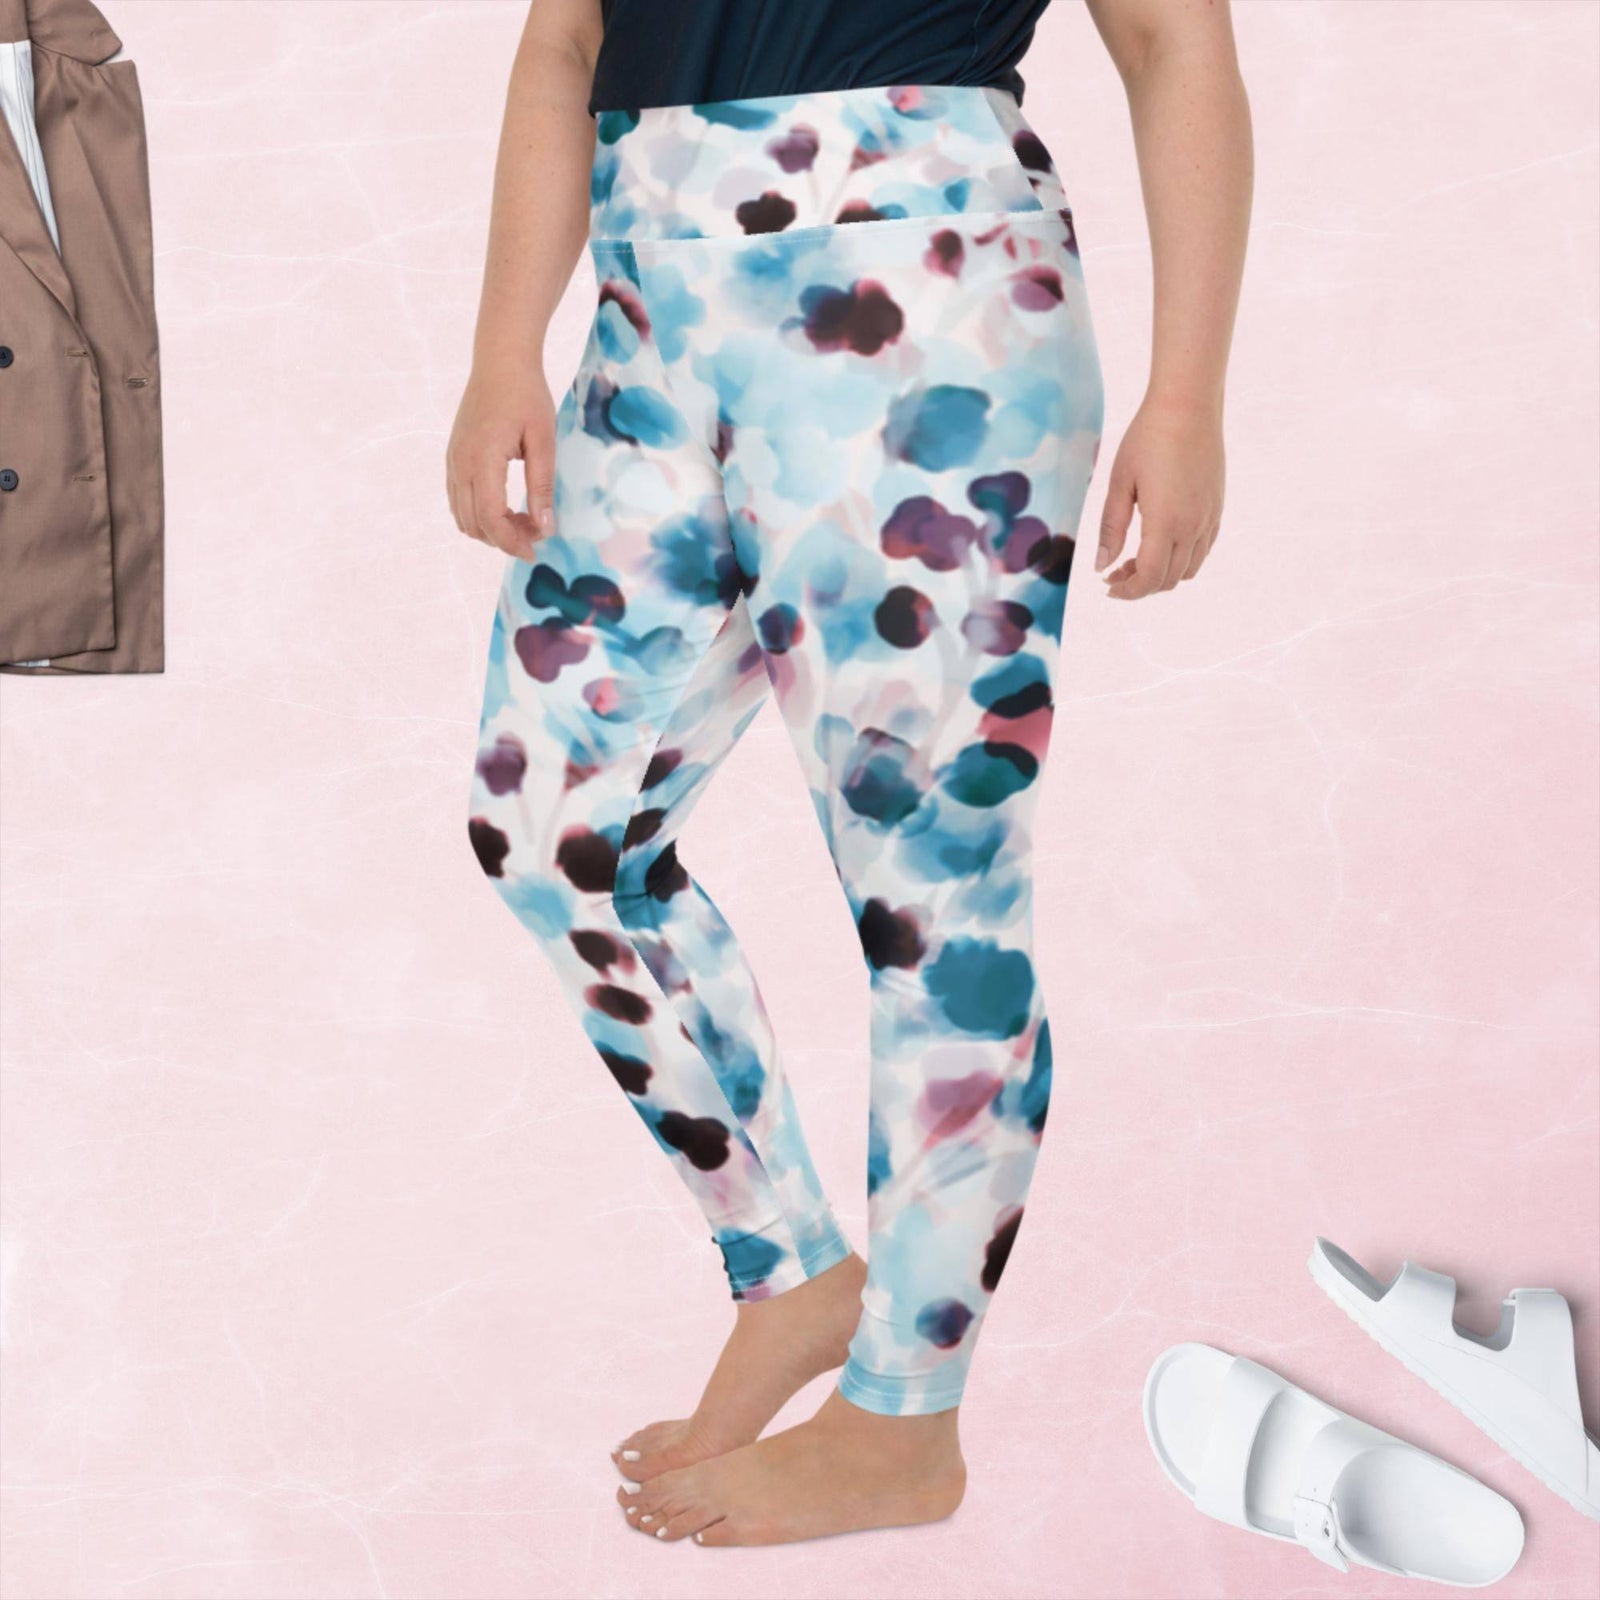 Plus Size Coloured Leggings in Sapphire Print - Revive Wear     Women's Plus Size Coloured Leggings. Made from a stretchy, comfortable fabric with a flattering fit. High Waist. Shop plus-size leggings today!